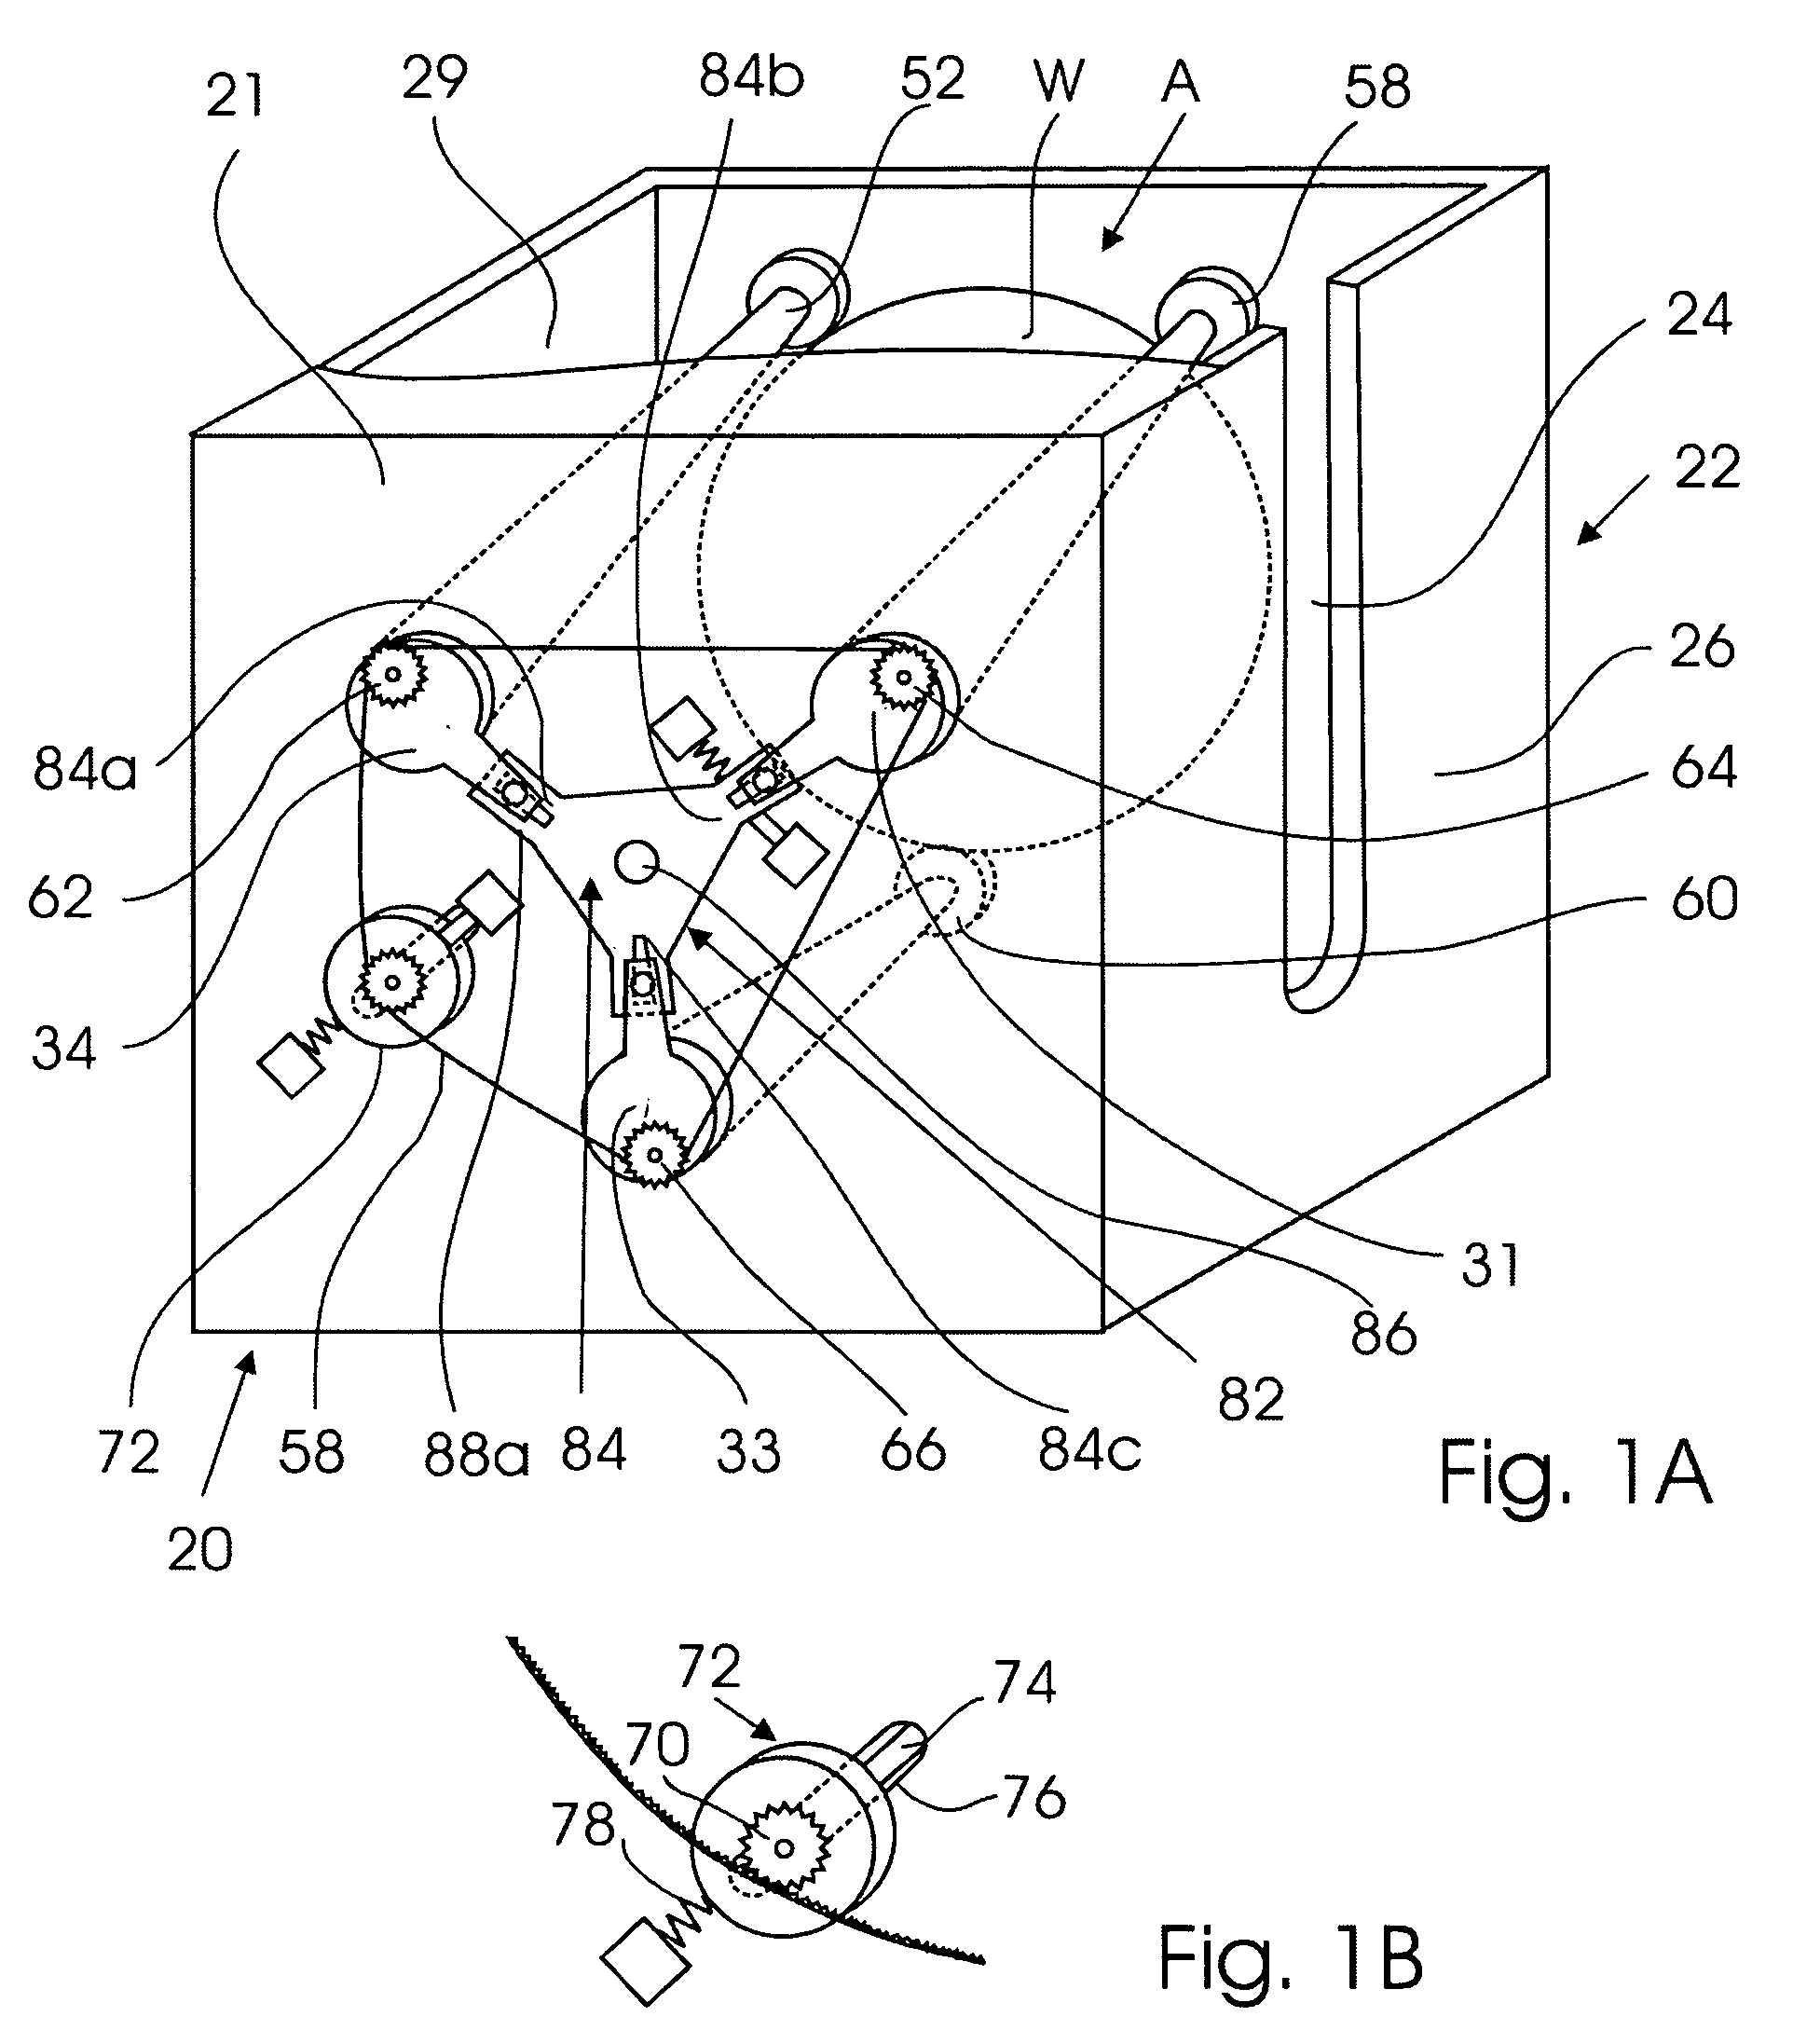 Holding and rotary driving mechanism for flat objects